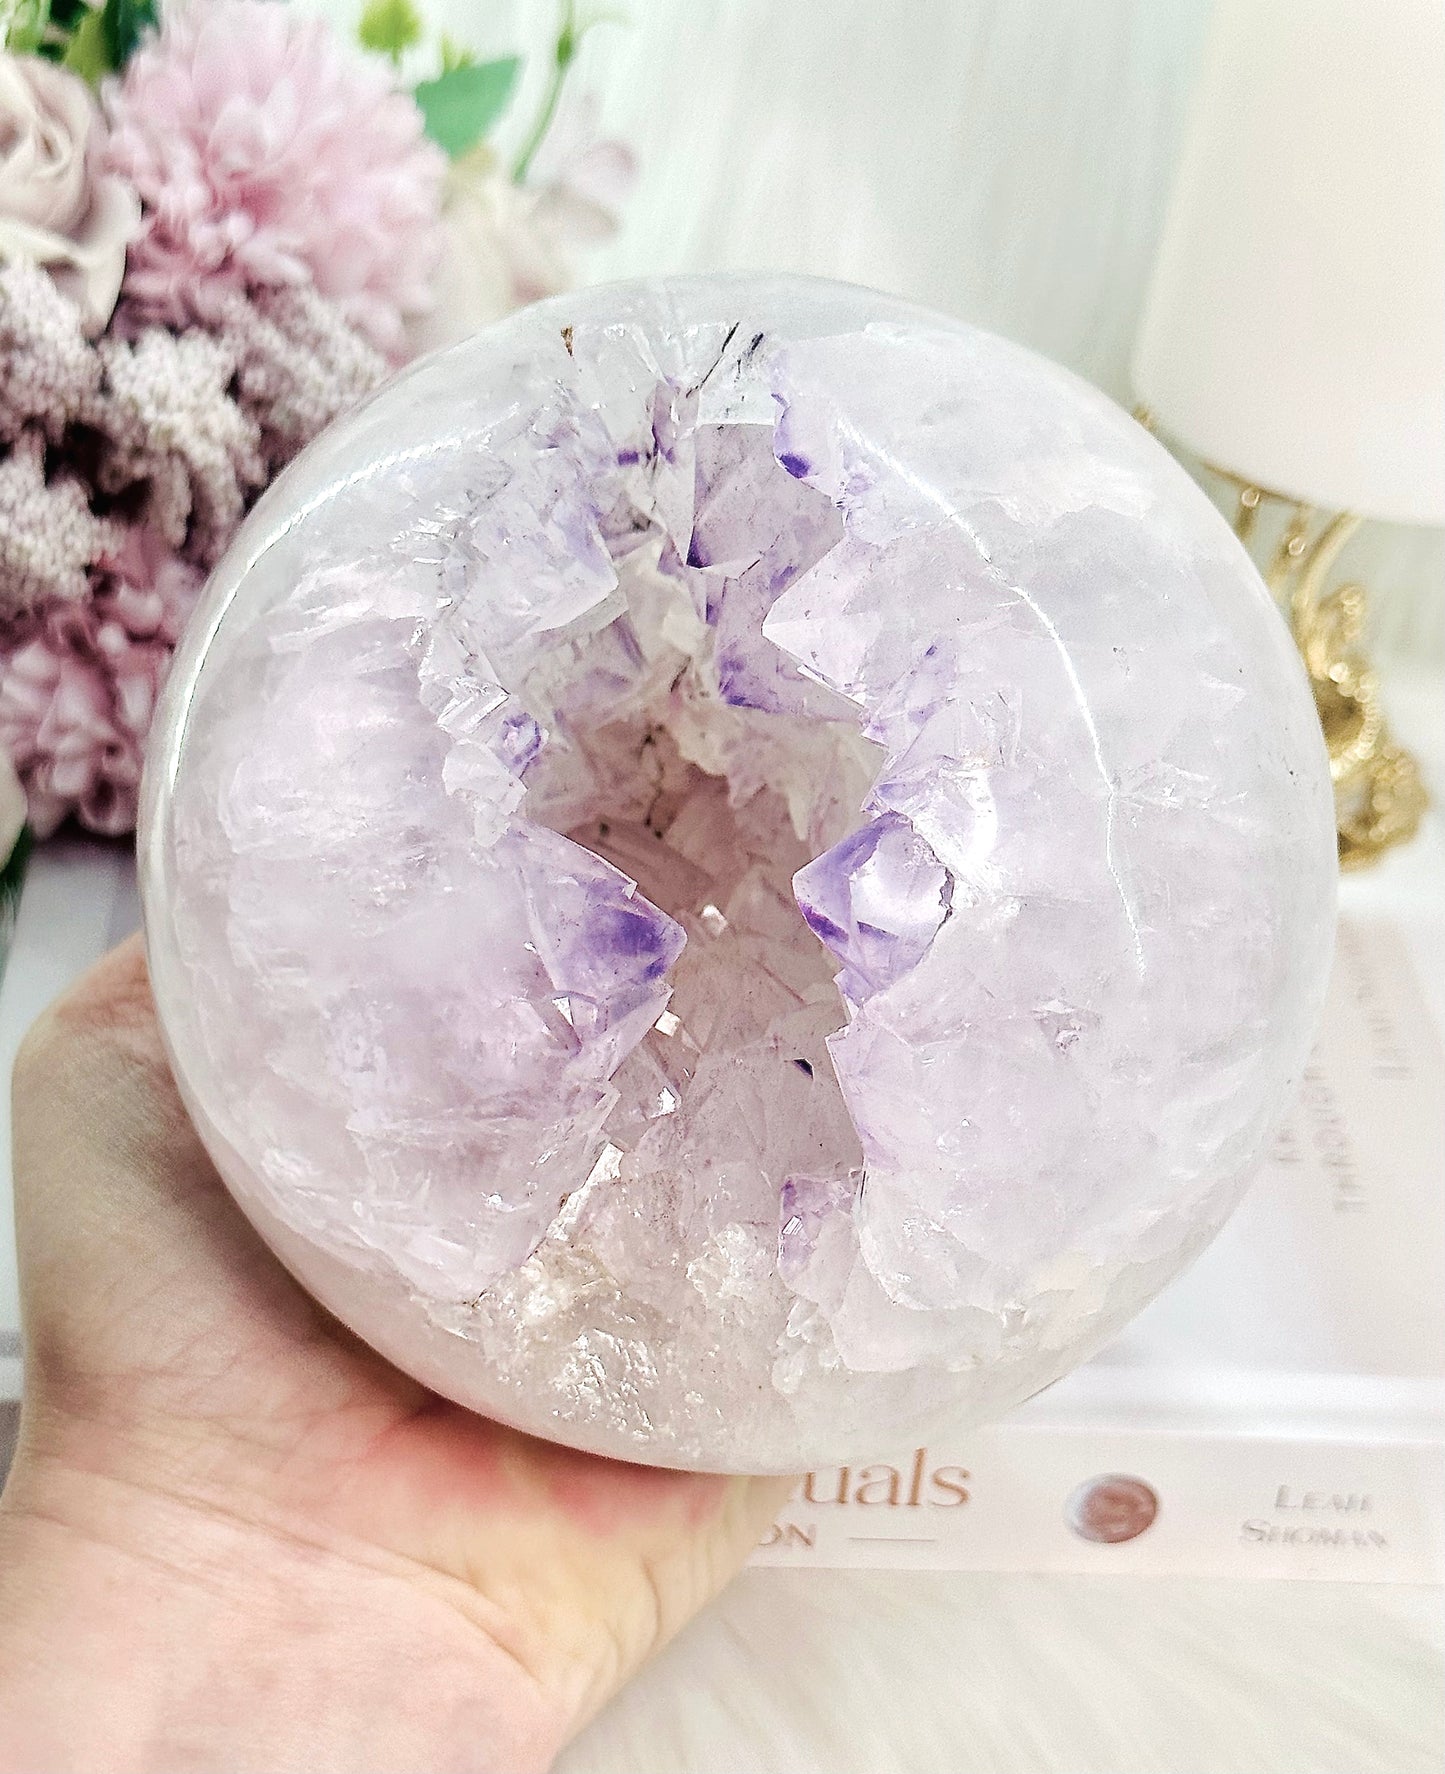 Classy & Fabulous Huge 2KG Druzy Amethyst In Quartz Sphere on Stand From Brazil ~ An Absolute Masterpiece